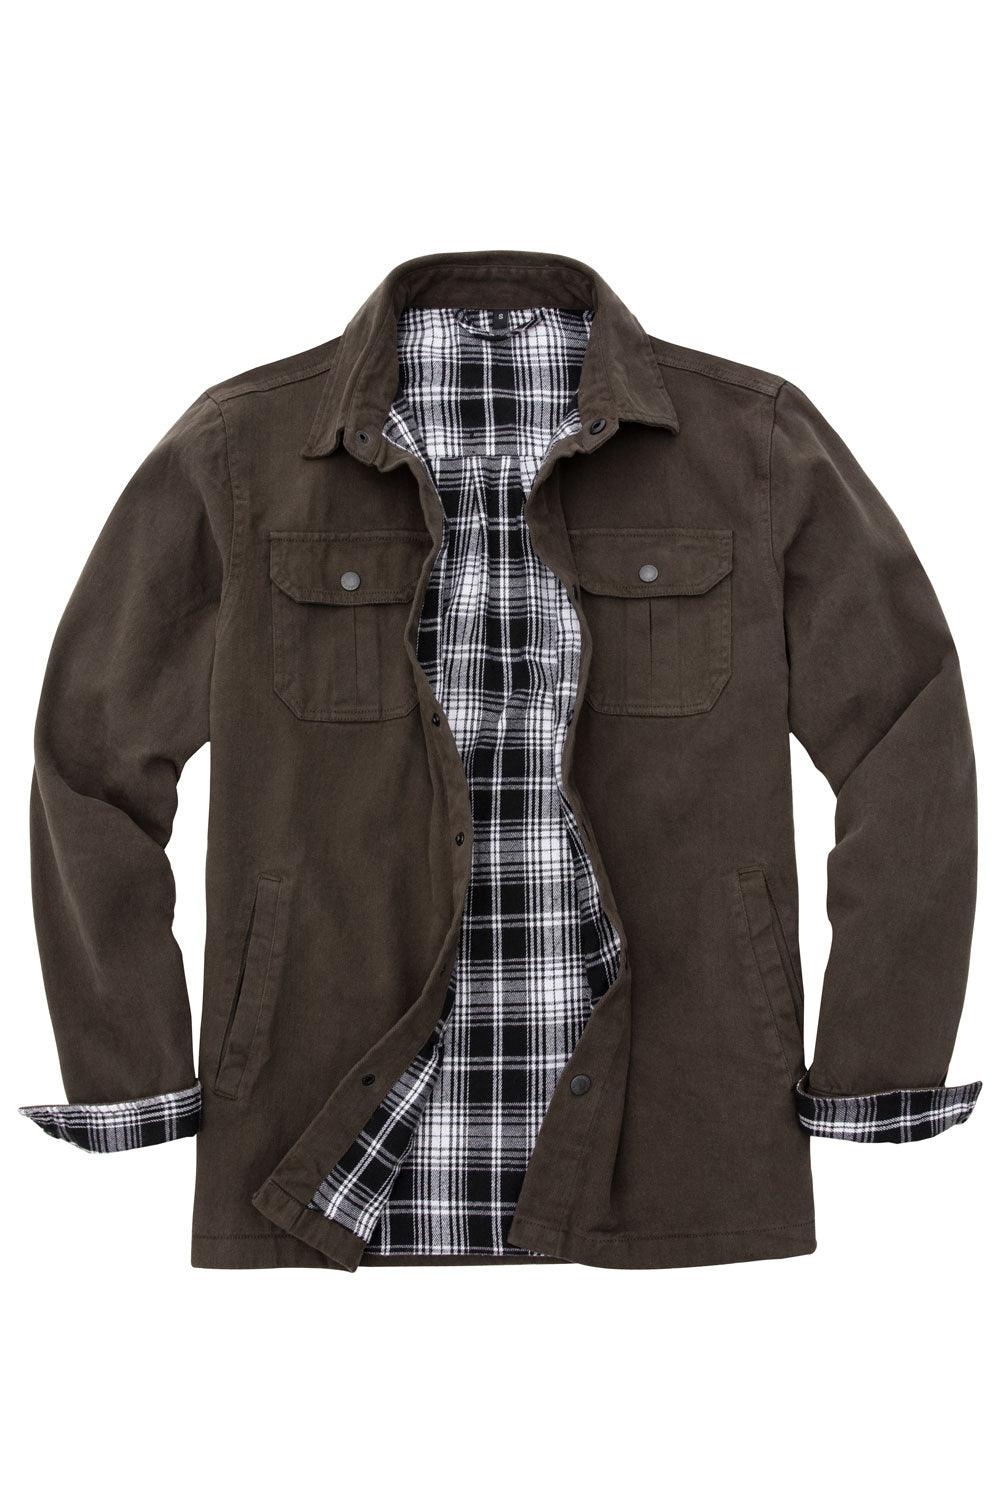 Men's Flannel Lined Heavy Washed Cotton Outdoor Utility Shirt Jacket